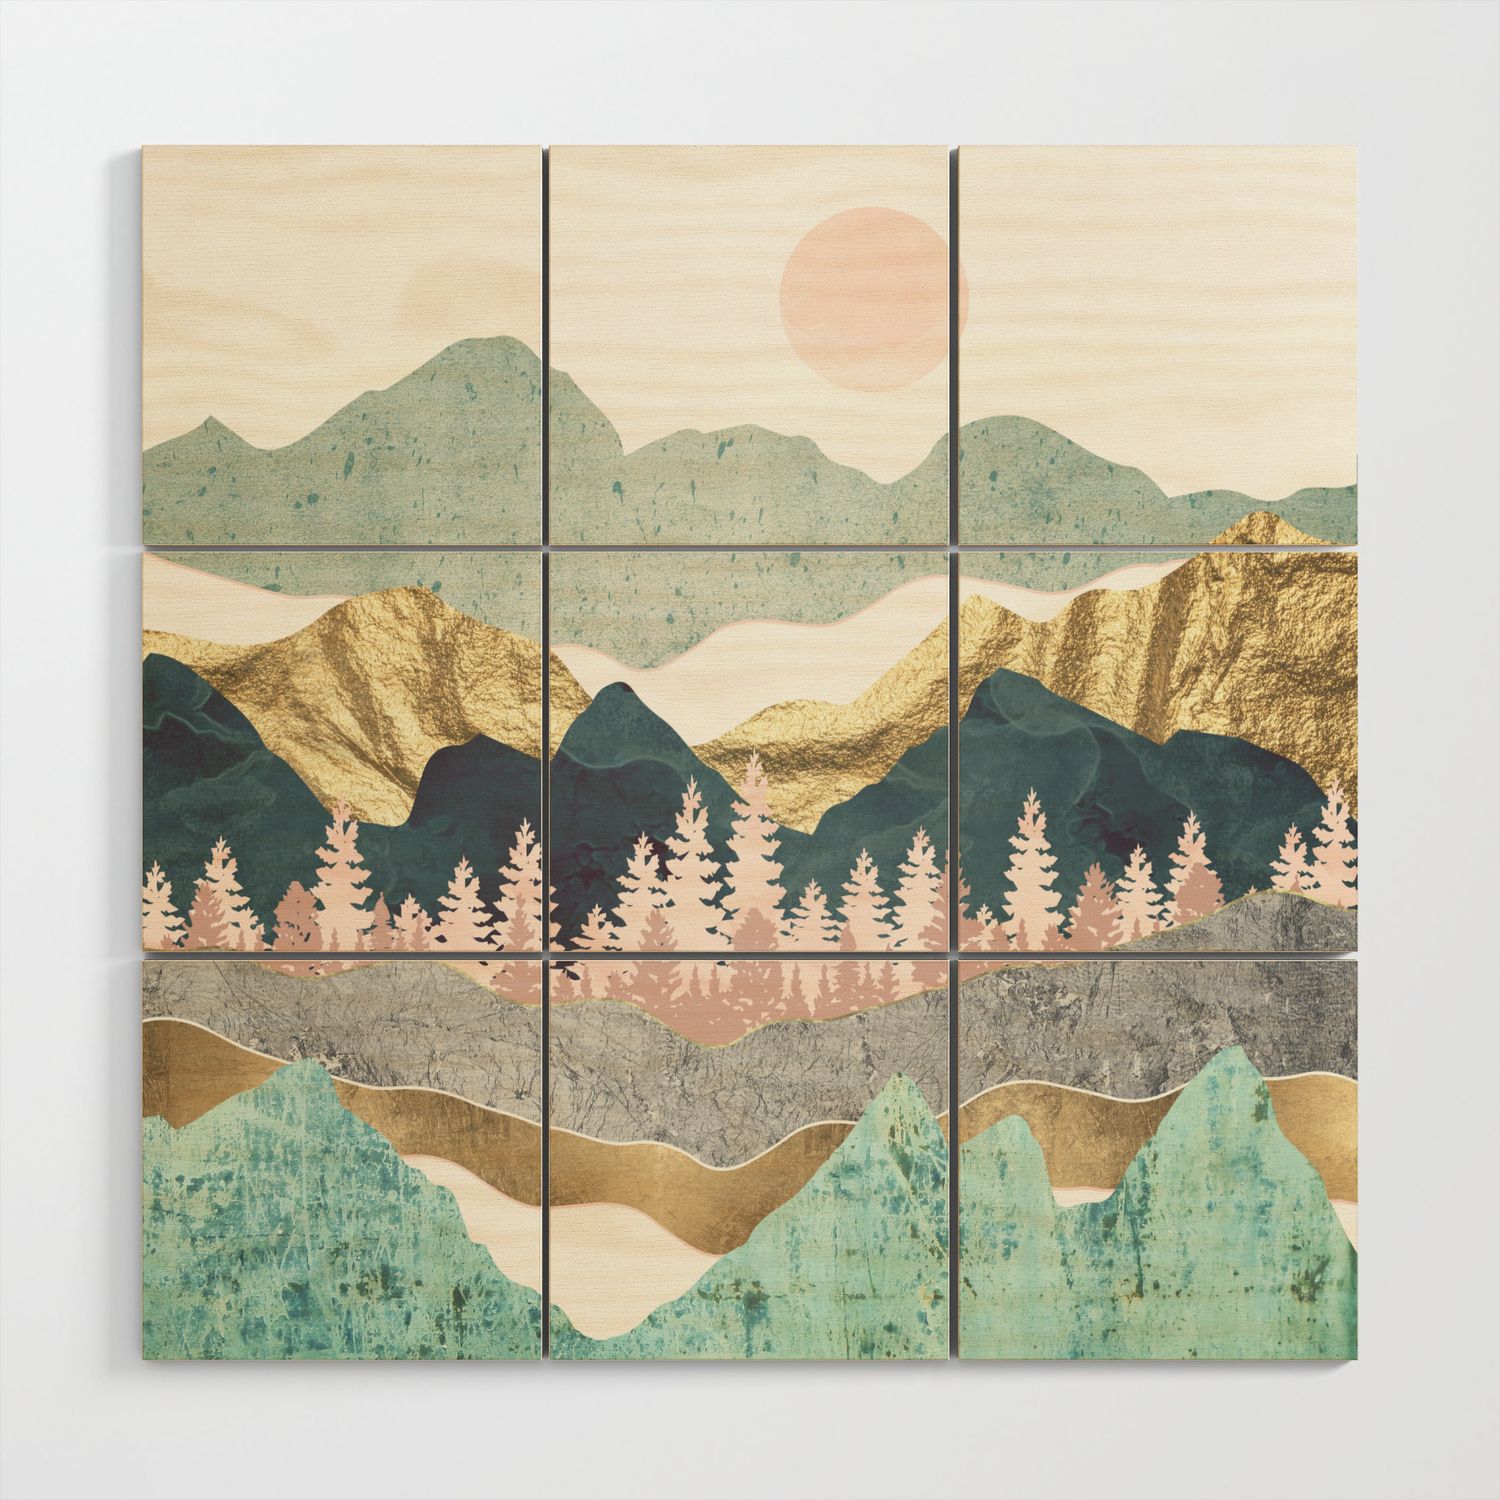 Summer Vista Wood Wall Artspacefrogdesigns | Society6 Intended For Summers Wood Wall Art (View 1 of 15)